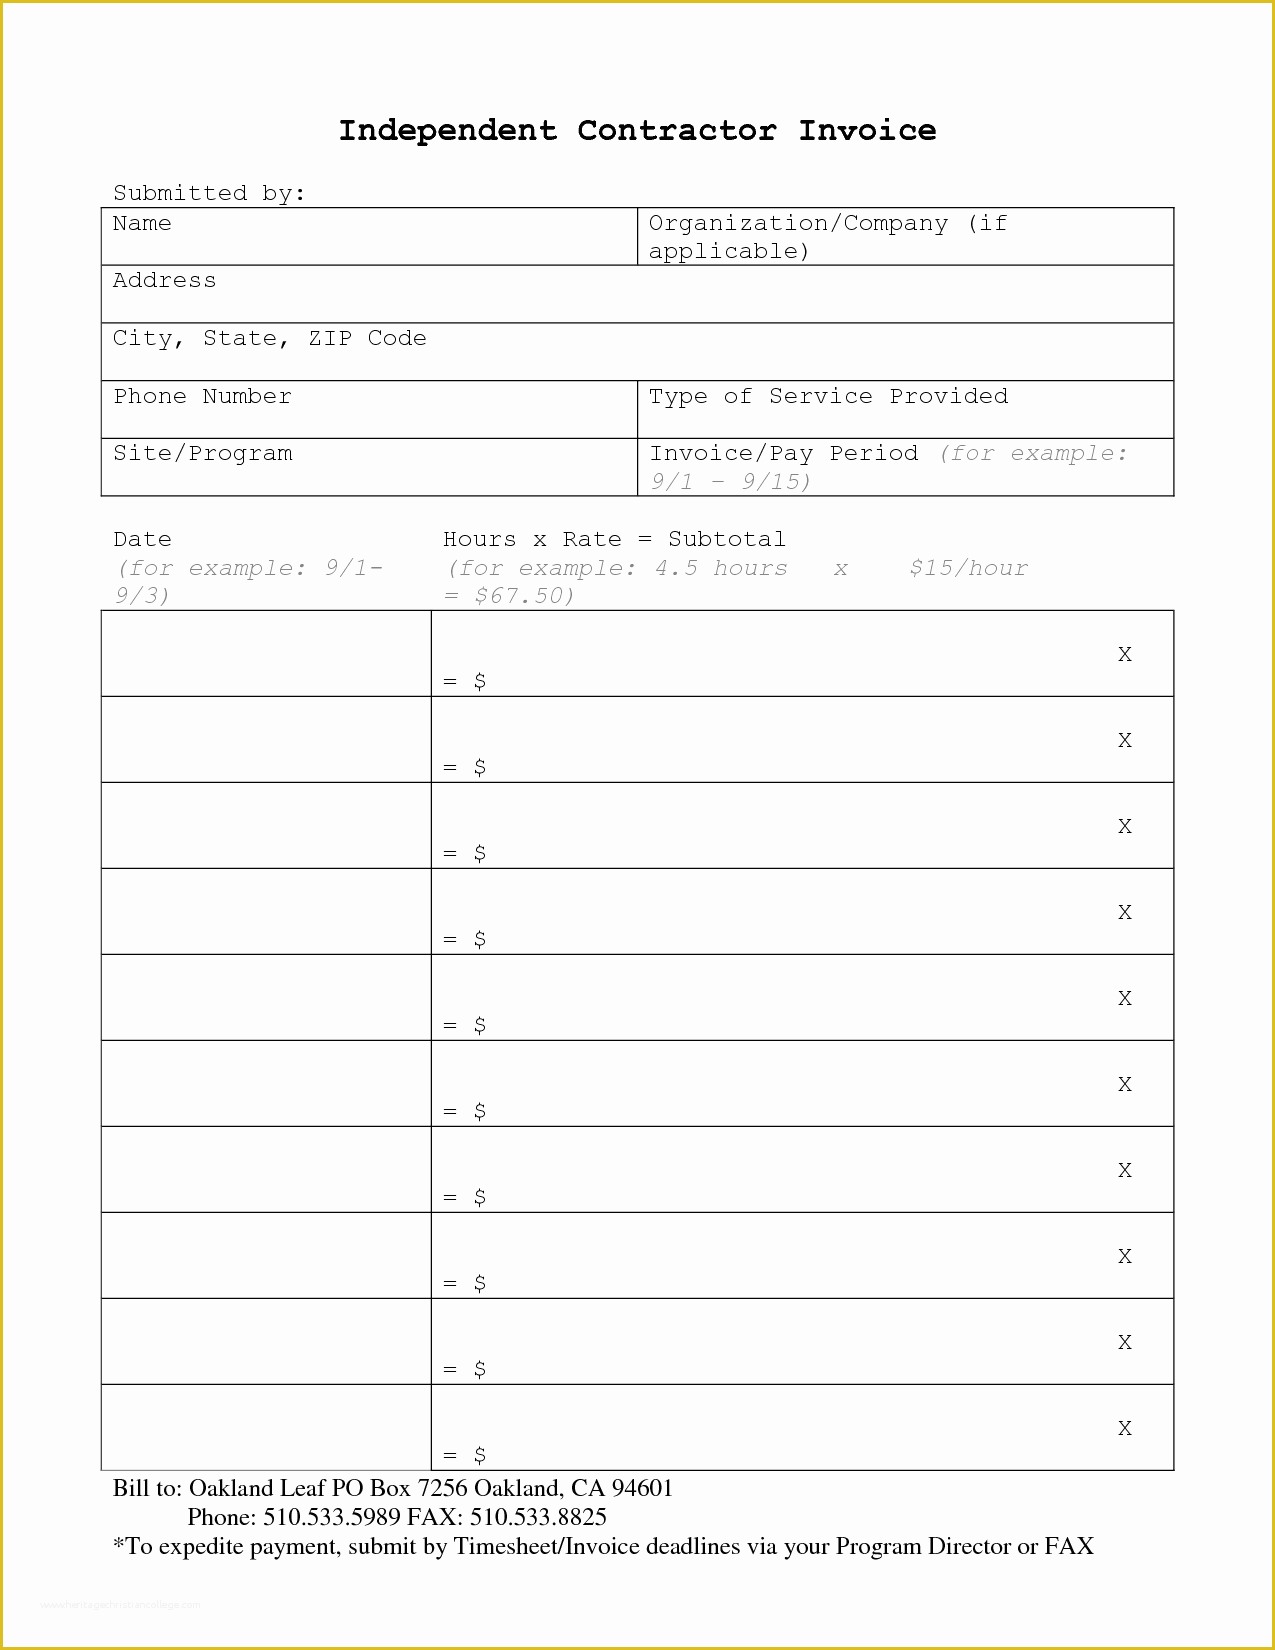 Independent Contractor Invoice Template Free Of Independent Contractor Invoice Template